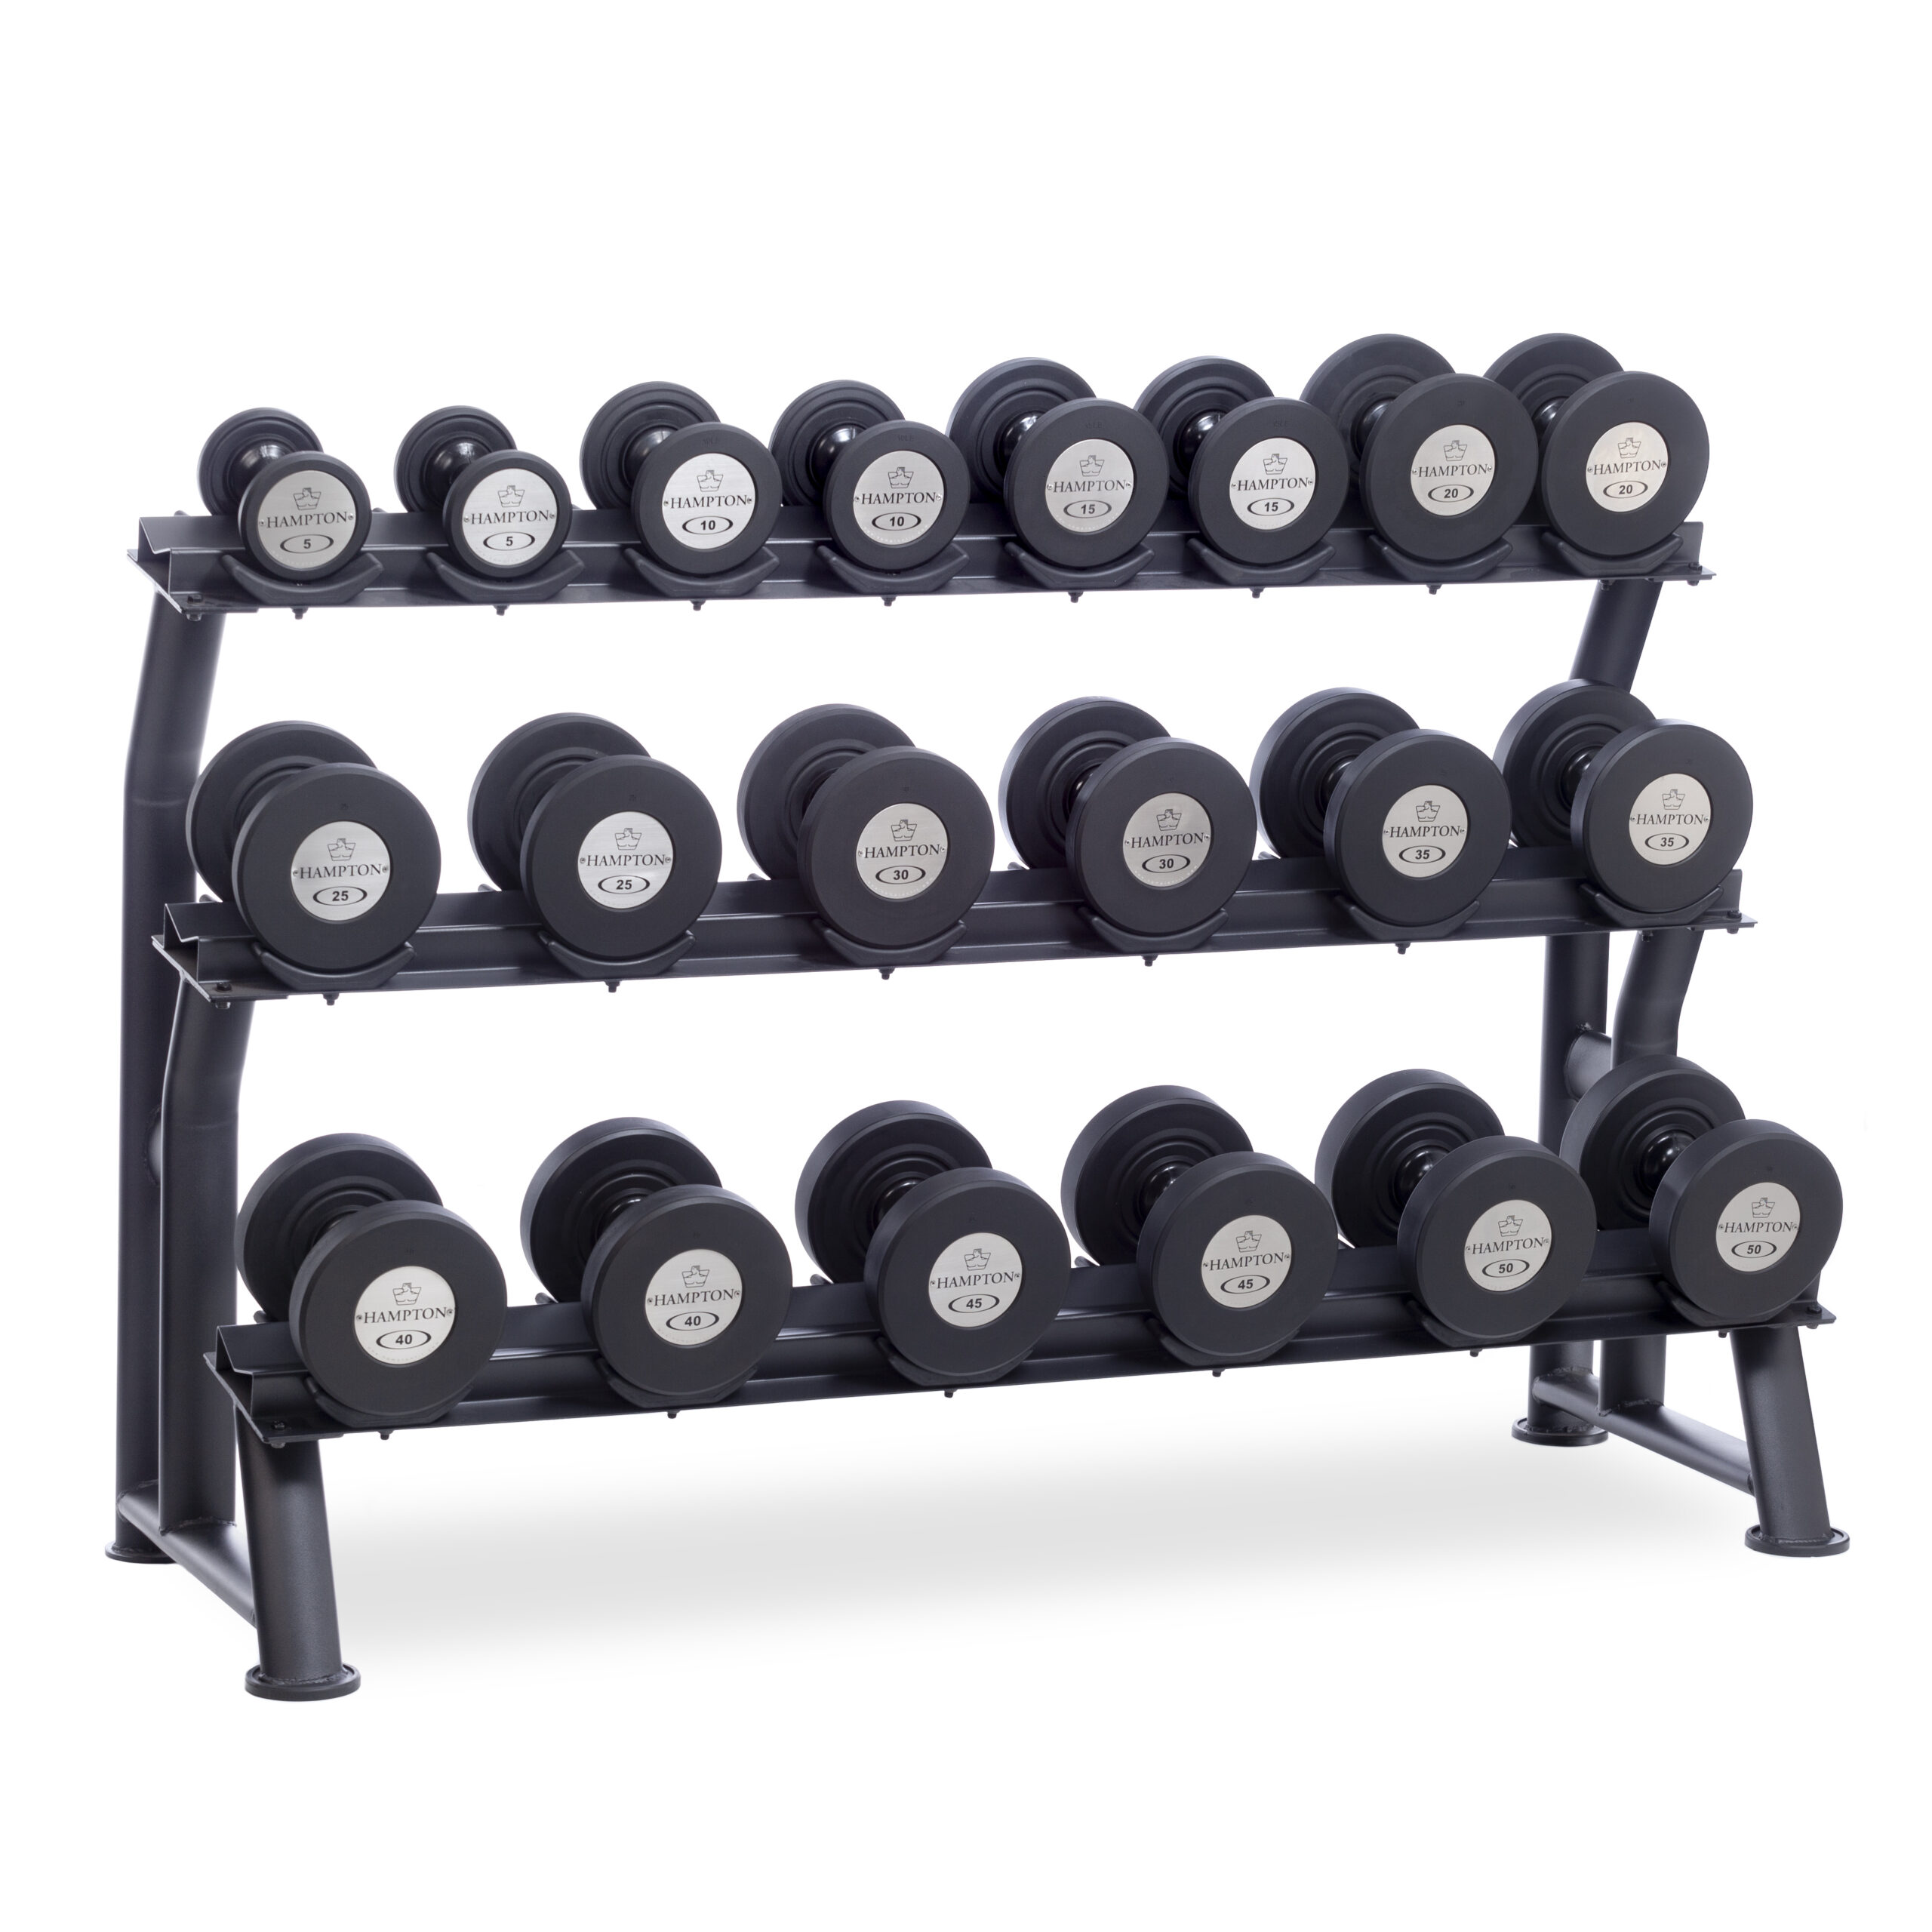 DUMBELL SUPPORT YourFit Equipment i343cl7l5